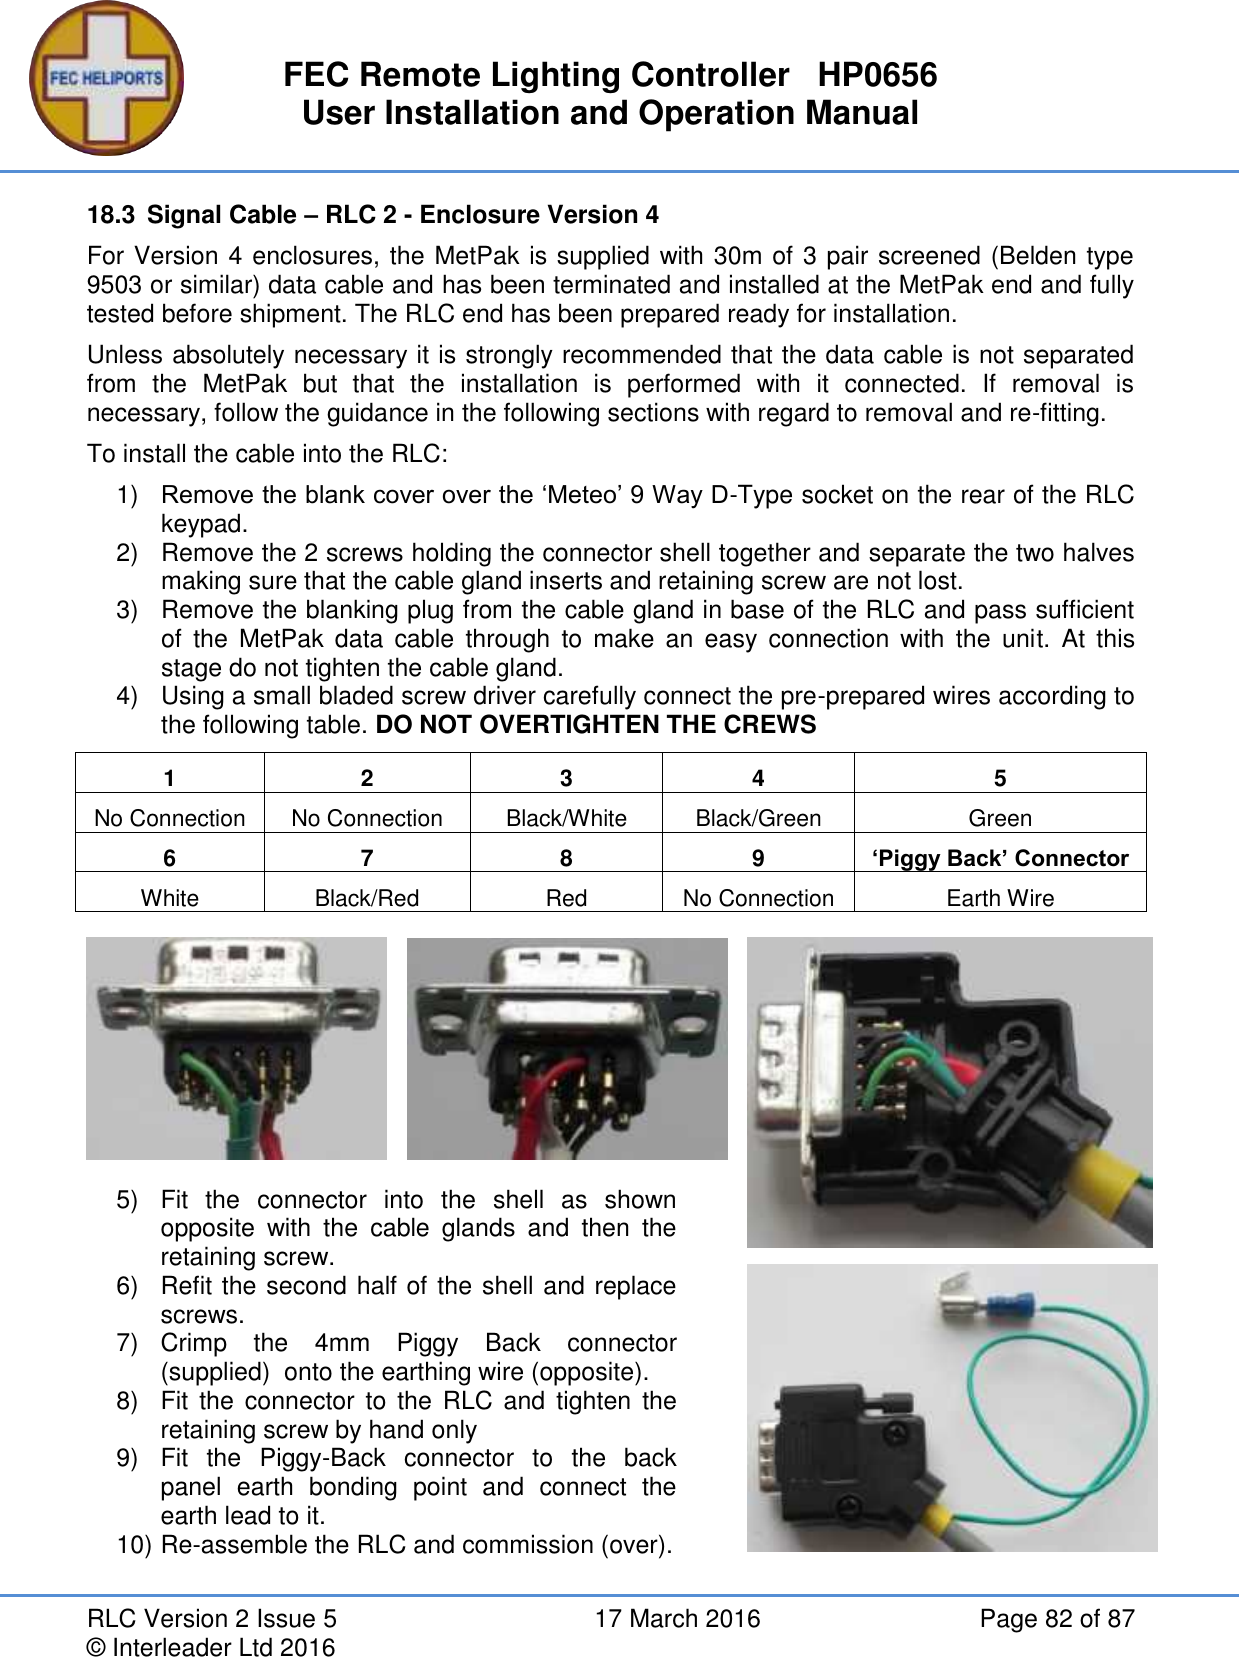 FEC Remote Lighting Controller   HP0656 User Installation and Operation Manual RLC Version 2 Issue 5  17 March 2016  Page 82 of 87 © Interleader Ltd 2016 18.3  Signal Cable – RLC 2 - Enclosure Version 4 For Version 4 enclosures, the MetPak is supplied with 30m of 3 pair screened (Belden type 9503 or similar) data cable and has been terminated and installed at the MetPak end and fully tested before shipment. The RLC end has been prepared ready for installation. Unless absolutely necessary it is strongly recommended that the data cable is not separated from  the  MetPak  but  that  the  installation  is  performed  with  it  connected.  If  removal  is necessary, follow the guidance in the following sections with regard to removal and re-fitting. To install the cable into the RLC: 1) Remove the blank cover over the ‘Meteo’ 9 Way D-Type socket on the rear of the RLC keypad. 2)  Remove the 2 screws holding the connector shell together and separate the two halves making sure that the cable gland inserts and retaining screw are not lost. 3)  Remove the blanking plug from the cable gland in base of the RLC and pass sufficient of  the  MetPak  data  cable  through  to  make  an  easy  connection  with  the  unit.  At  this stage do not tighten the cable gland. 4)  Using a small bladed screw driver carefully connect the pre-prepared wires according to the following table. DO NOT OVERTIGHTEN THE CREWS  1 2 3 4 5 No Connection No Connection Black/White Black/Green Green 6 7 8 9 ‘Piggy Back’ Connector White Black/Red Red No Connection Earth Wire       5)  Fit  the  connector  into  the  shell  as  shown opposite  with  the  cable  glands  and  then  the retaining screw. 6)  Refit the second half of the shell and replace screws. 7)  Crimp  the  4mm  Piggy  Back  connector (supplied)  onto the earthing wire (opposite). 8)  Fit  the  connector  to  the  RLC and  tighten  the retaining screw by hand only 9)  Fit  the  Piggy-Back  connector  to  the  back panel  earth  bonding  point  and  connect  the earth lead to it. 10) Re-assemble the RLC and commission (over). 